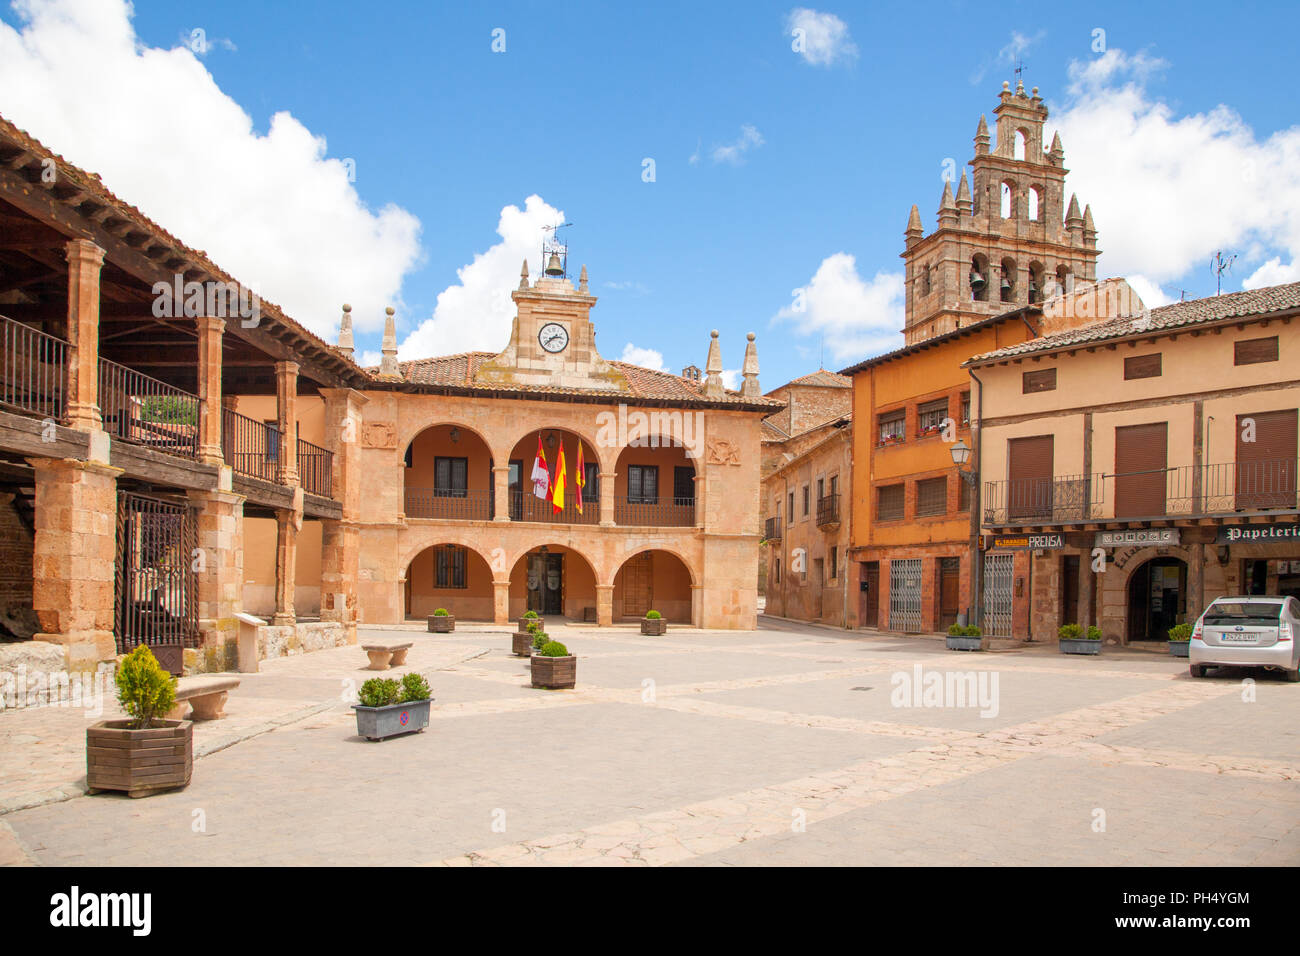 The Plaza Mayor in the Spanish town of Ayllon in the province of Segovia Castille y Leon Spain Stock Photo